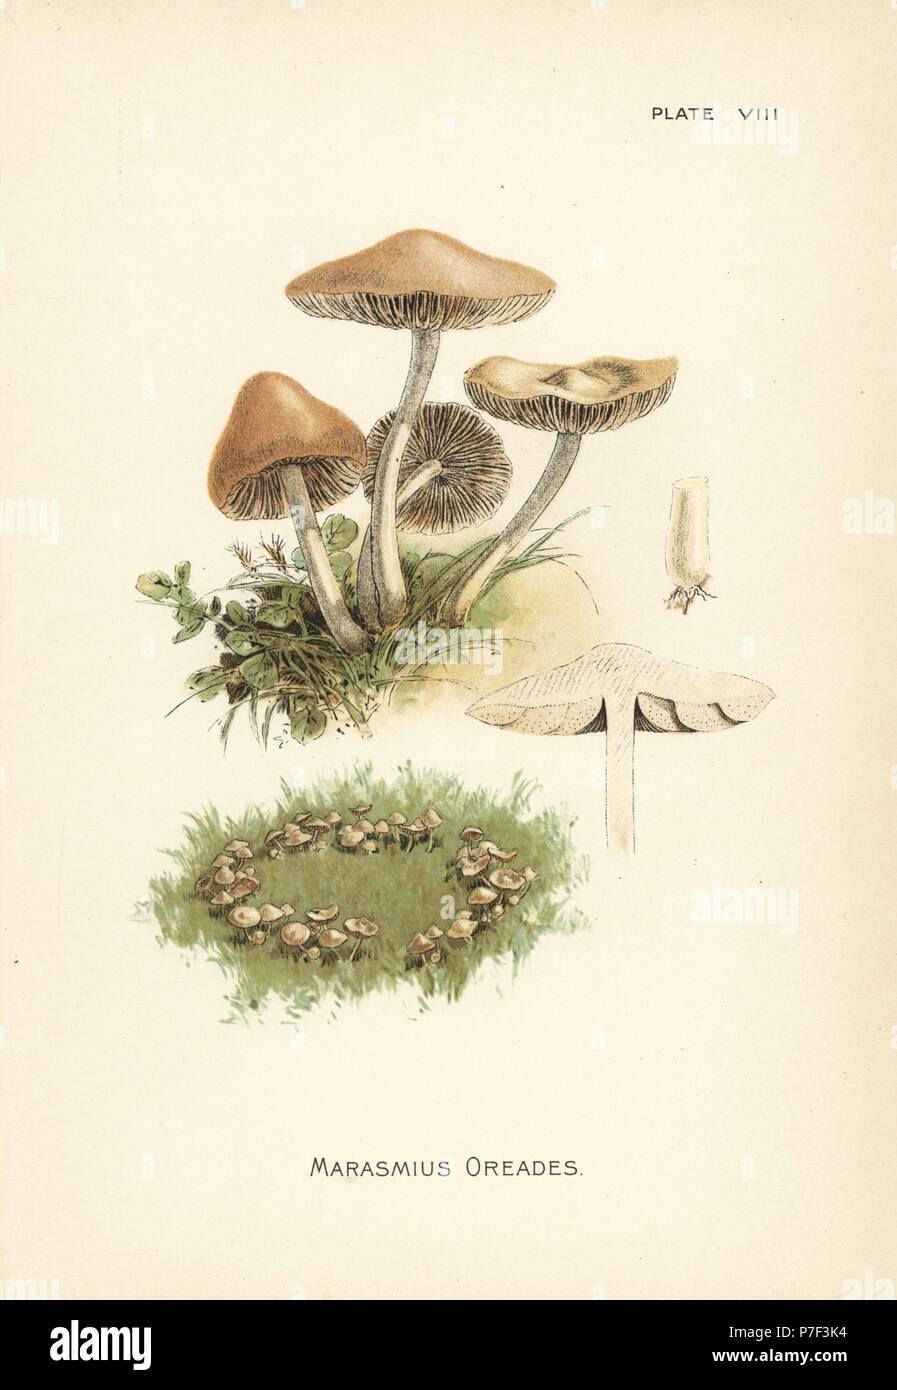 Scotch bonnet or fairy ring mushroom, Marasmius oreades. Chromolithograph after a botanical illustration by William Hamilton Gibson from his book Our Edible Toadstools and Mushrooms, Harper, New York, 1895. Stock Photo